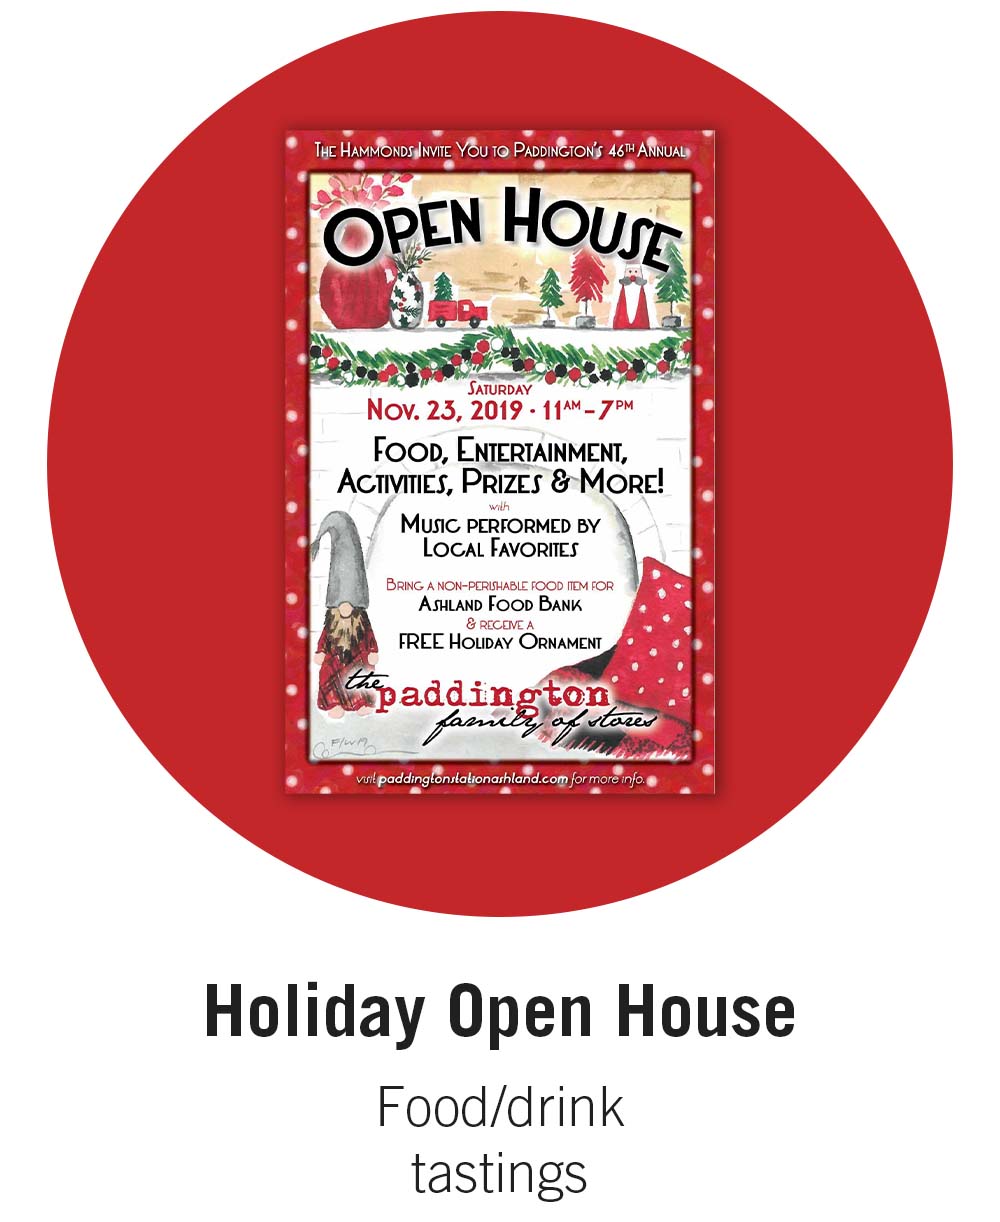 Holiday Open House Food/drink tastings